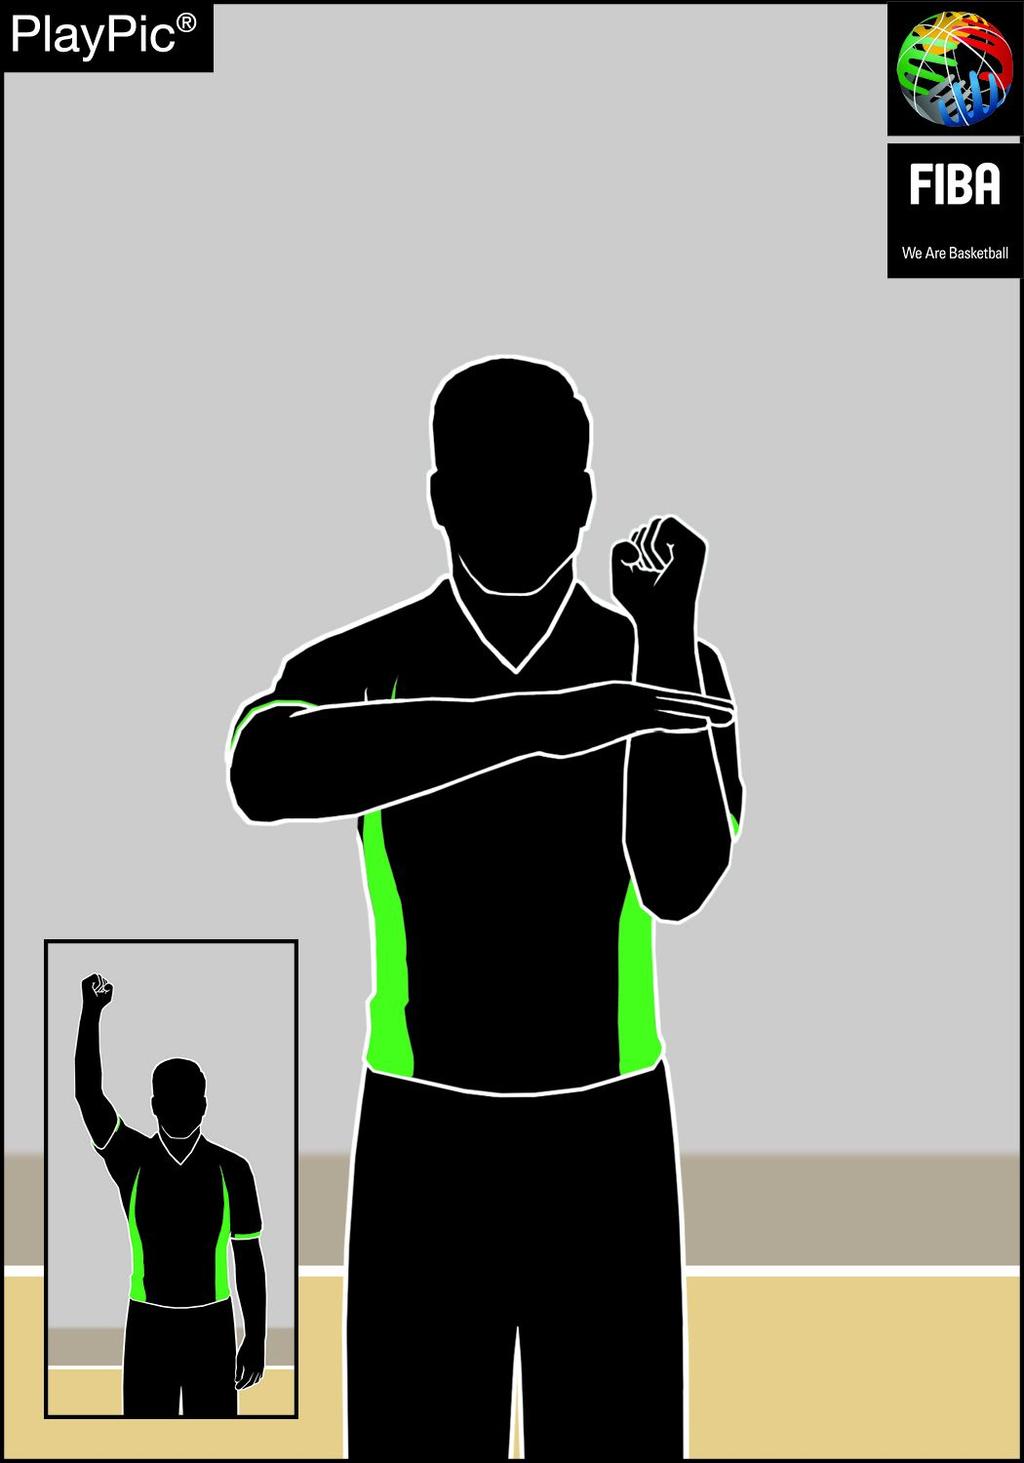 Signals / illegal contact to the hand Strike the side of the hand/fist towards the other